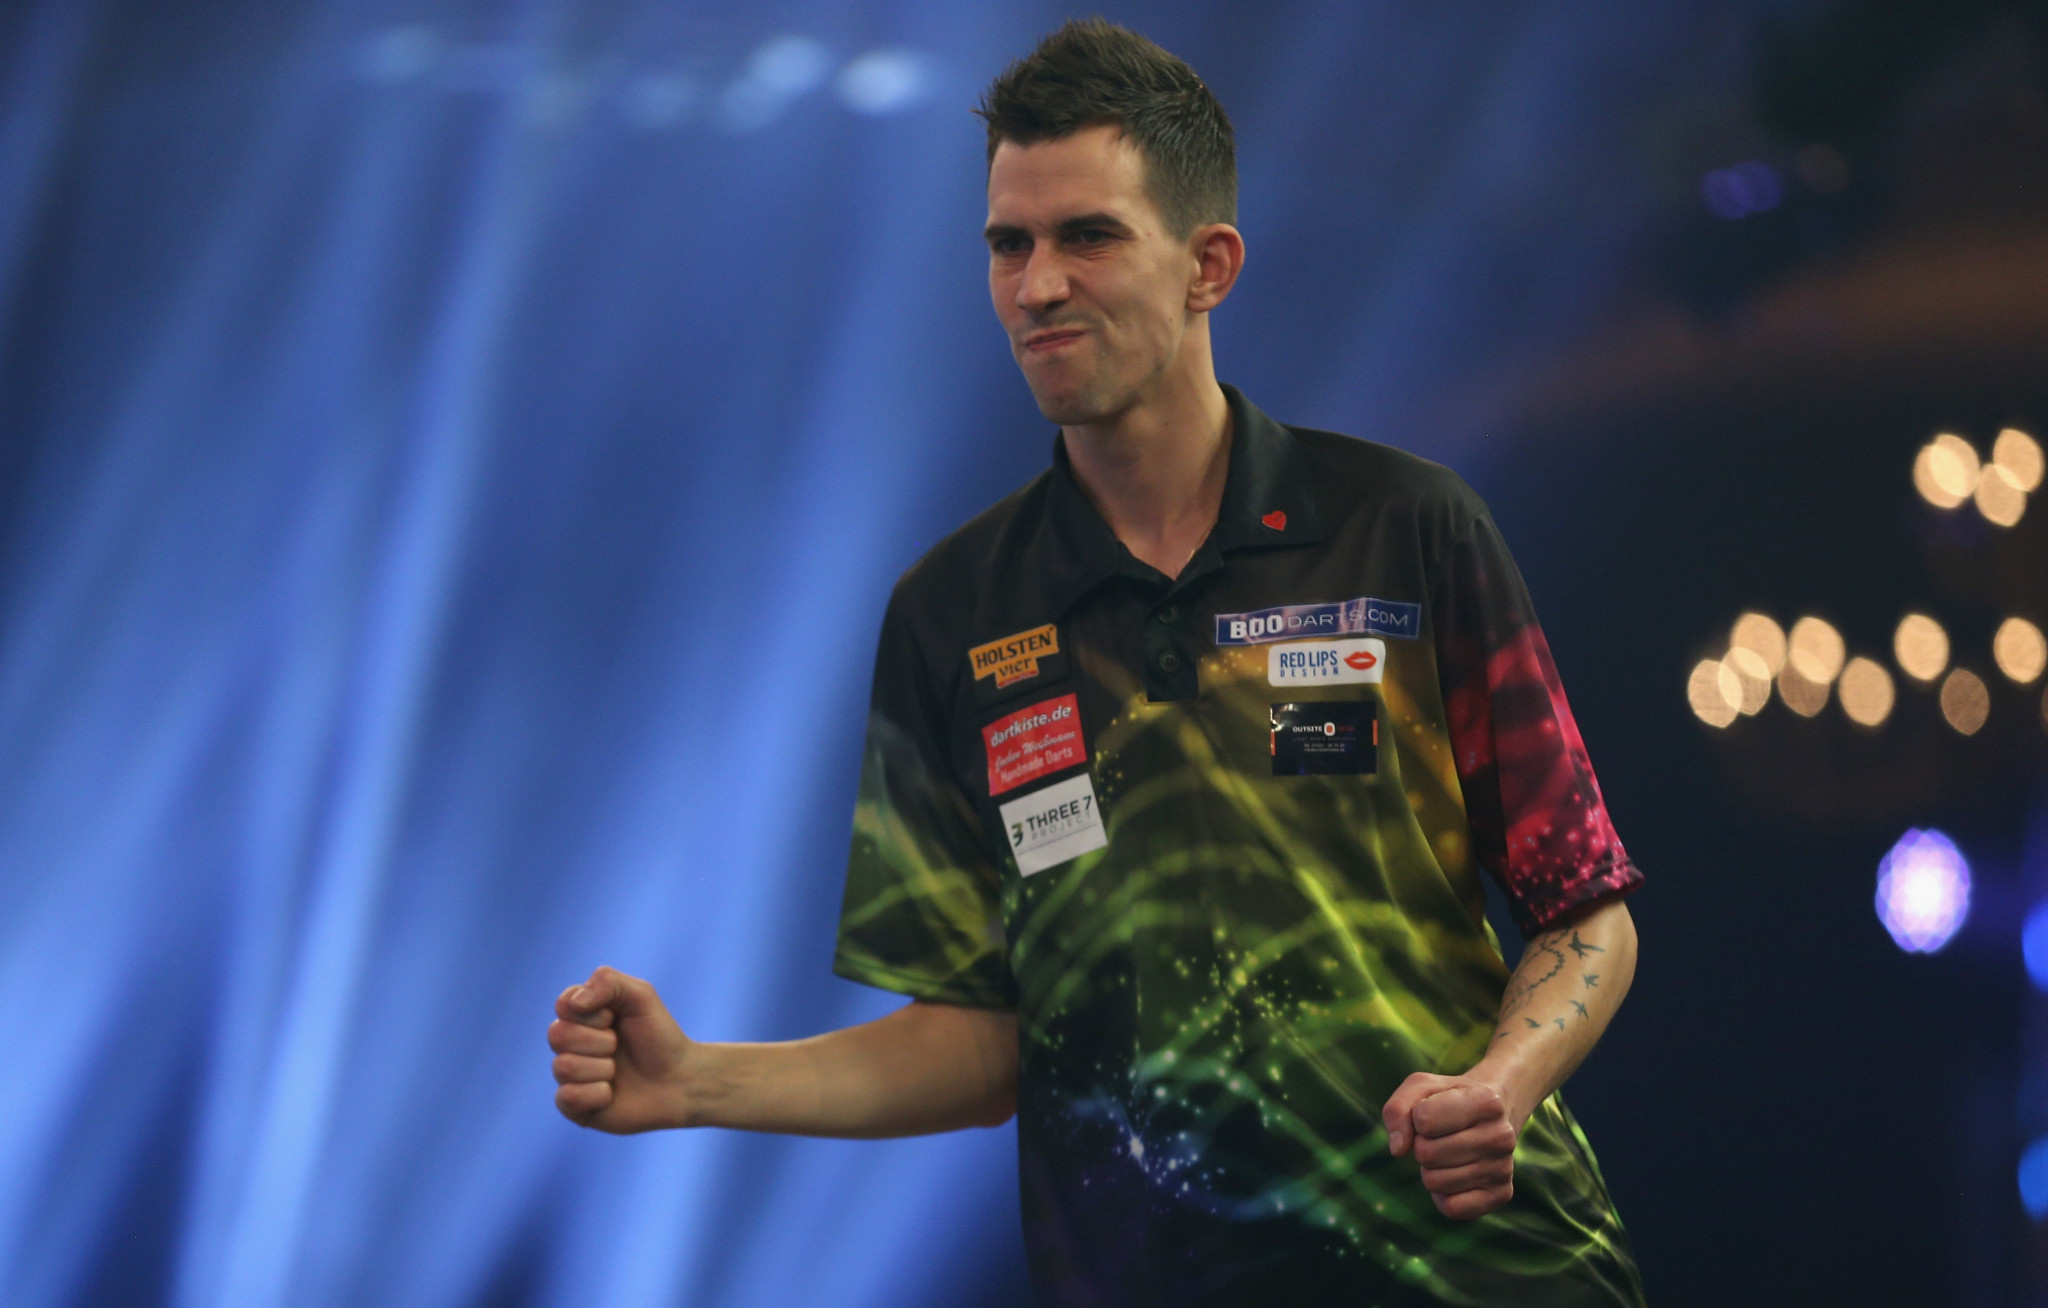 Michael Unterbuchner reached the second round of the BDO World Championship ©Getty Images